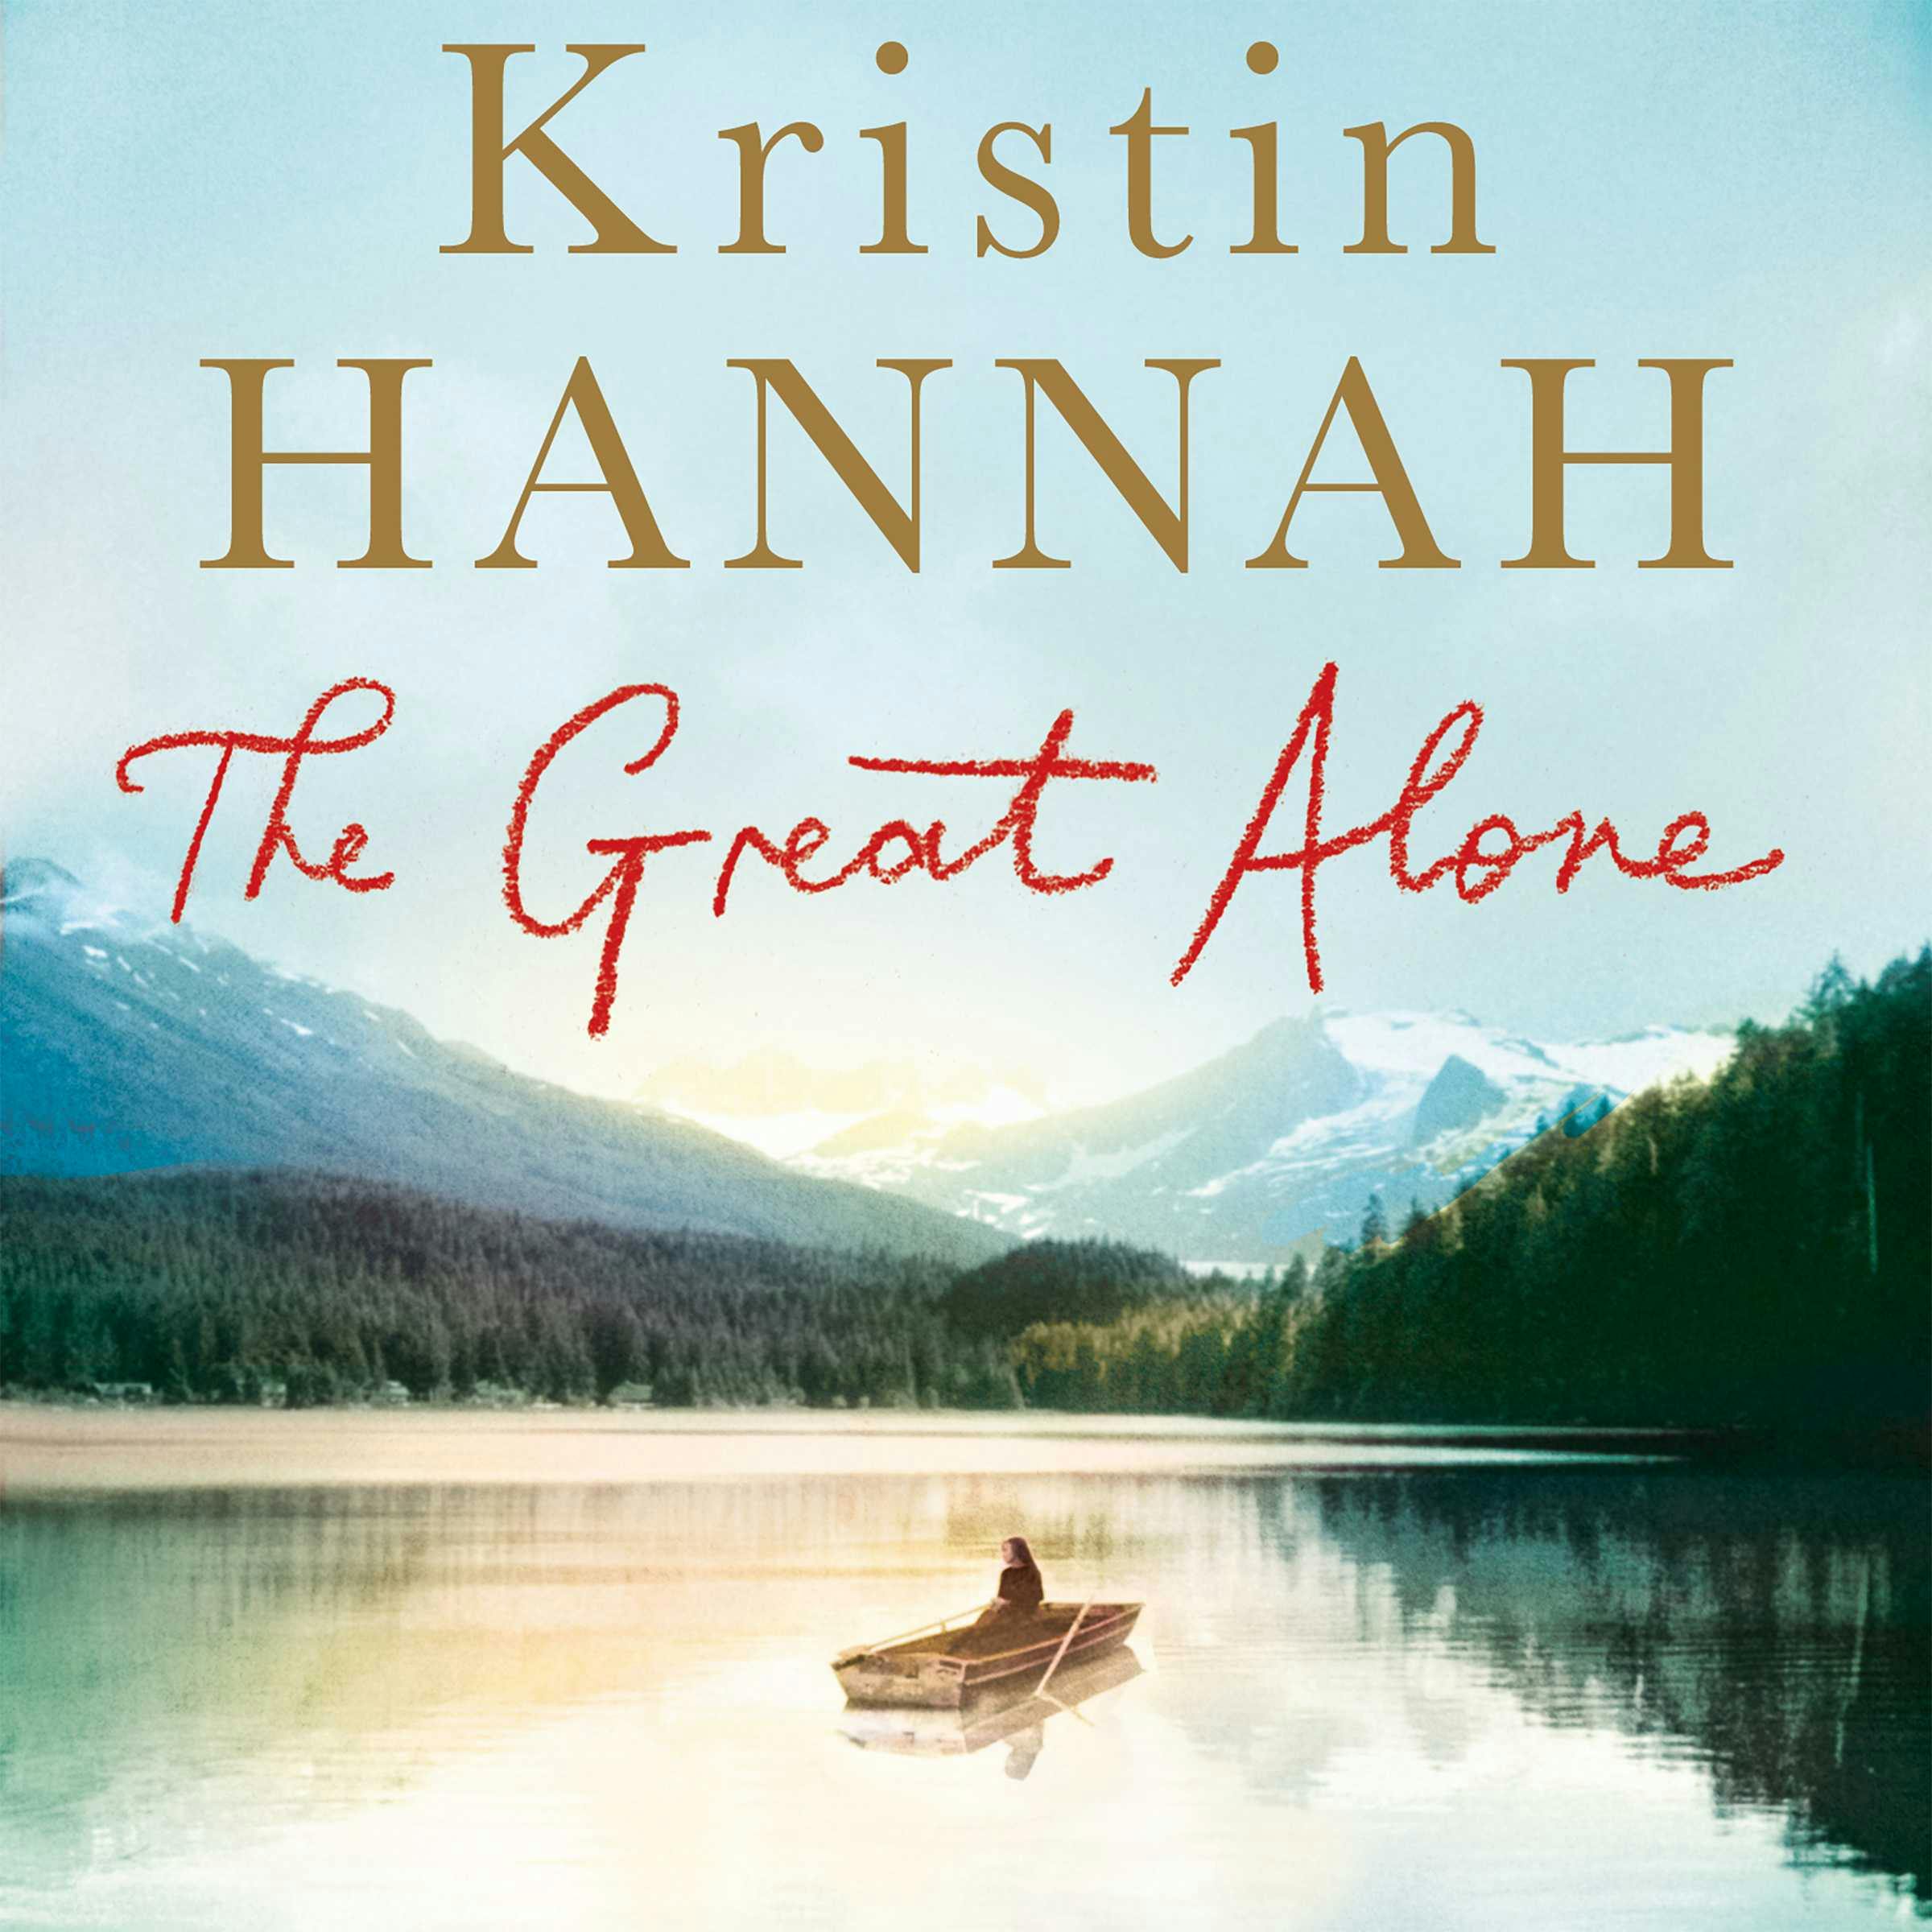 The Great Alone: A Compelling Story of Love, Heartbreak and Survival, From the Multi-million Copy Bestselling Author of The Nightingale - undefined